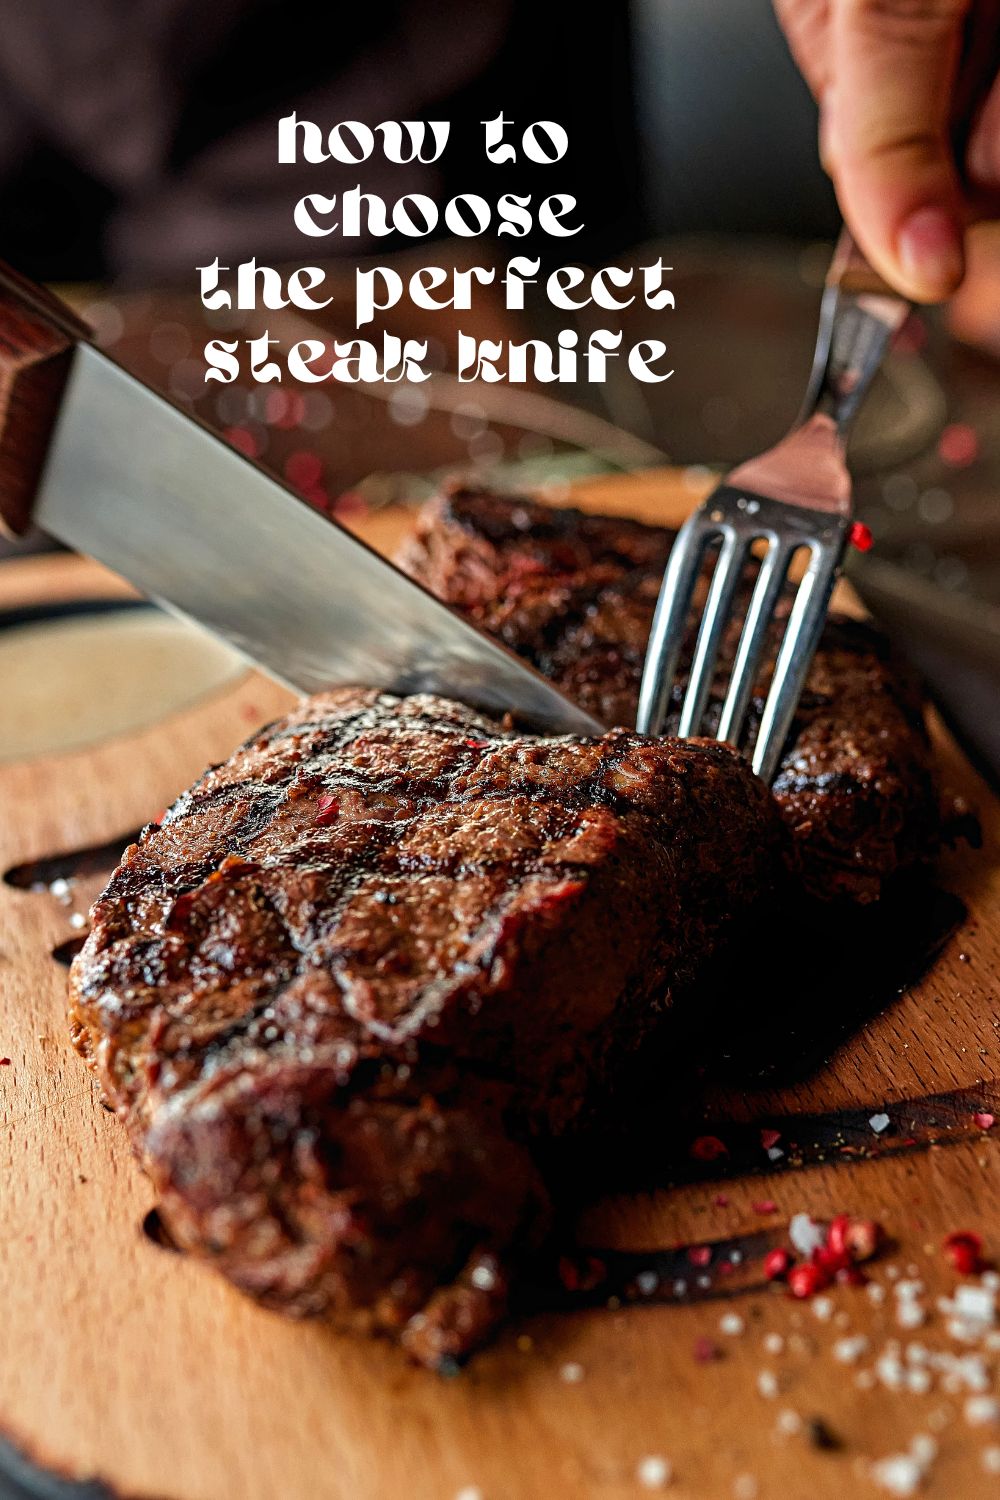 If steak is often on the menu in your home, it's time to upgrade your cutlery. Investing in top-quality steak knives can ensure each juicy bite of your steak will be as enjoyable as possible. Not only will the right knife make slicing steak easier, but it can also be used to cut through other types of meat. 